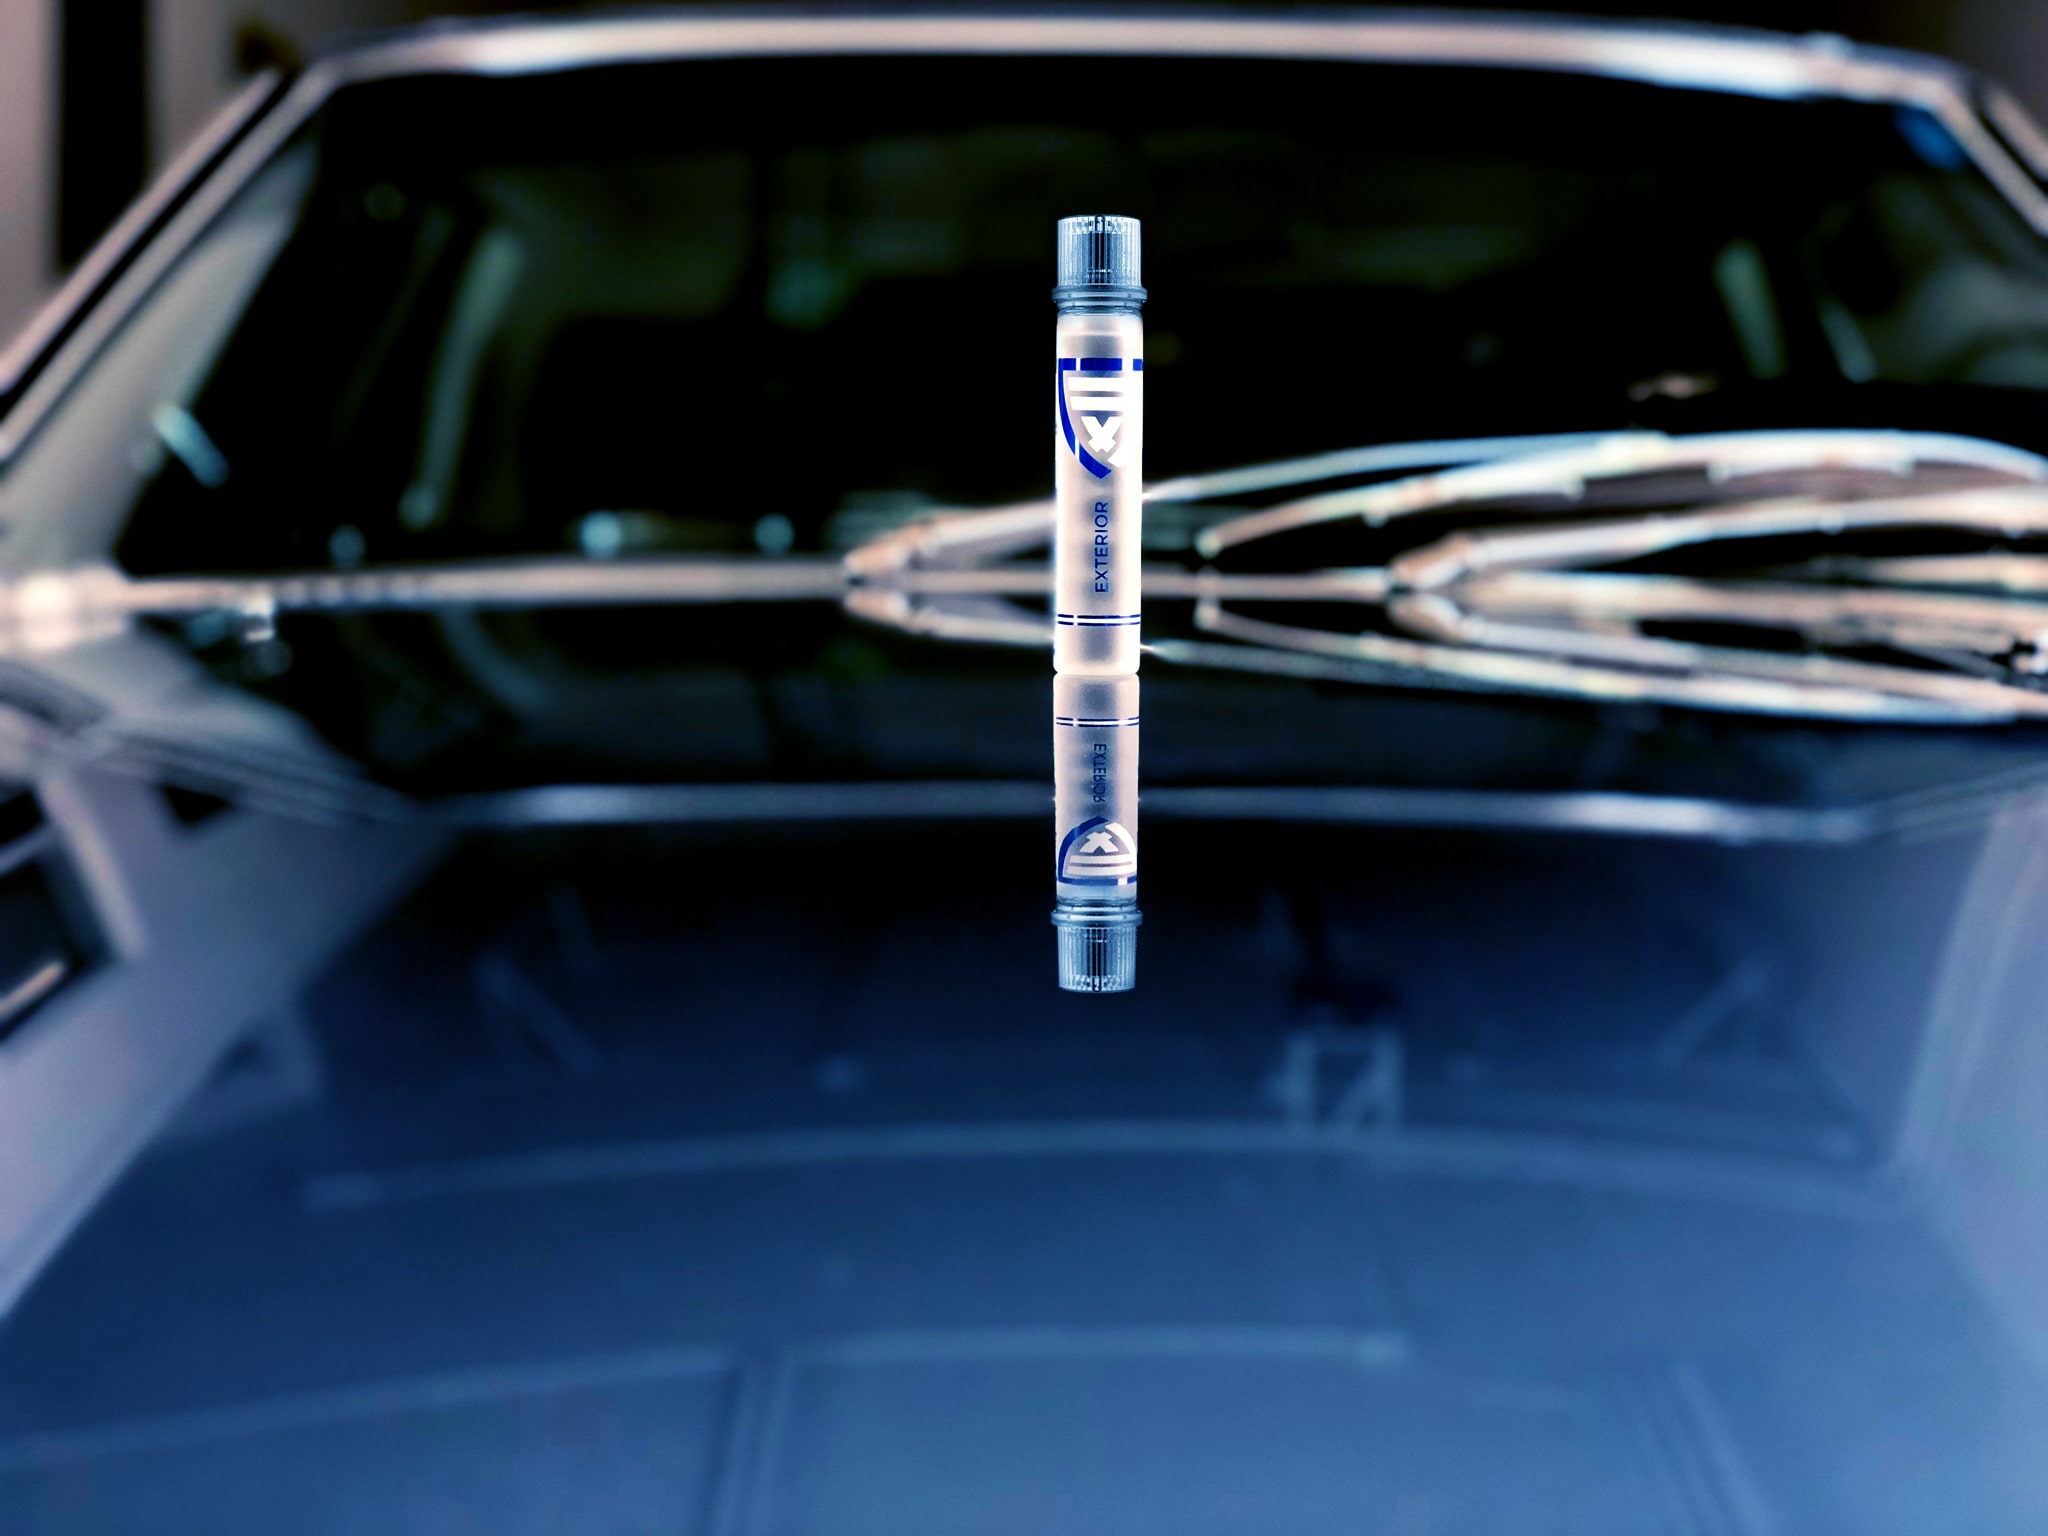 Crystal-clear ClearFX Exterior product bottle on the hood of a blue vintage 1976 Mercedes Benz 500 SL Coupe